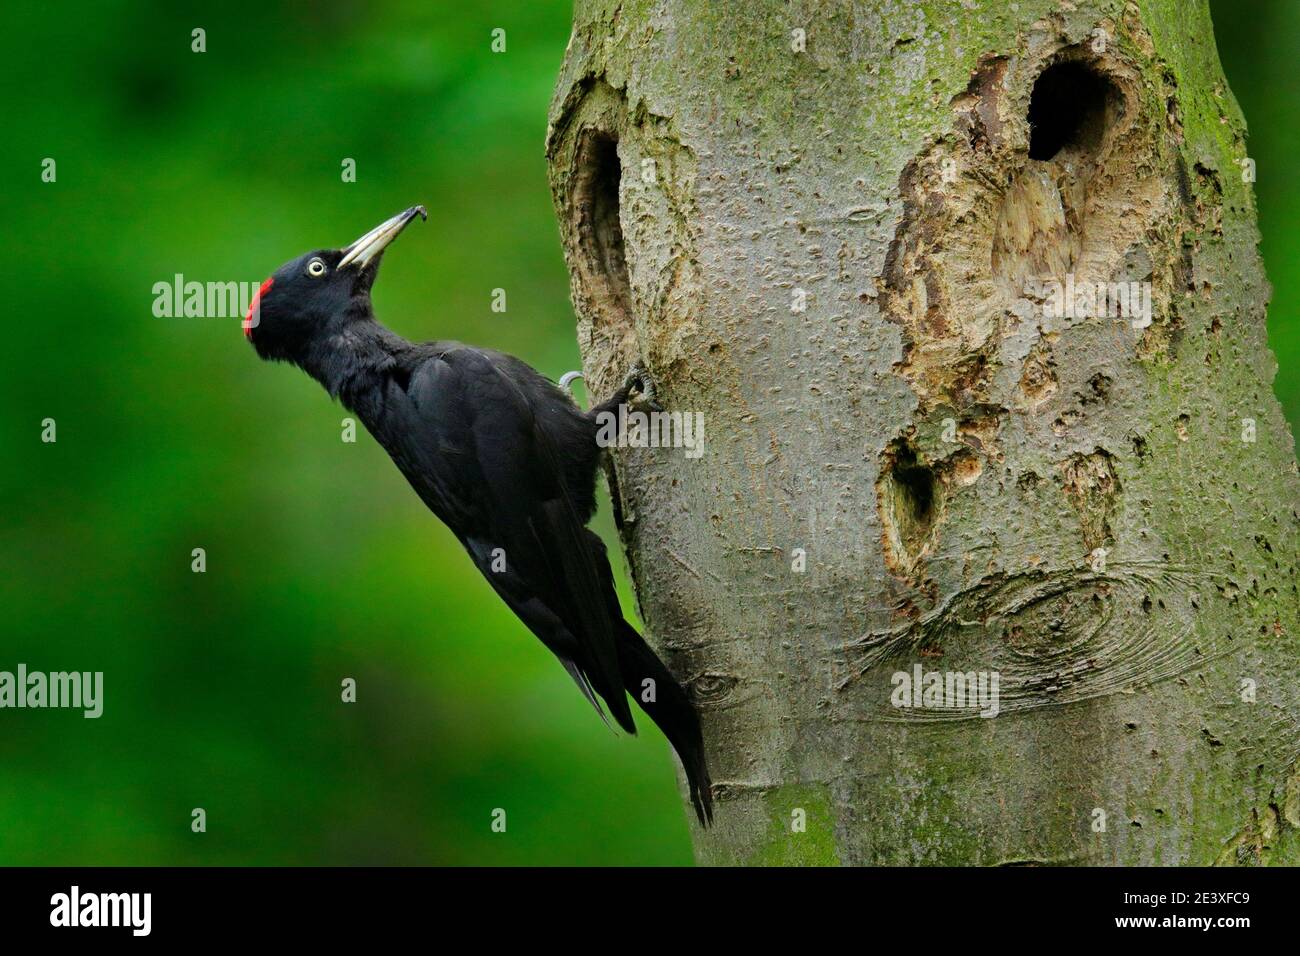 Woodpecker with chick in the nesting hole. Black woodpecker in the green summer forest. Wildlife scene with black bird in the nature habitat. Stock Photo